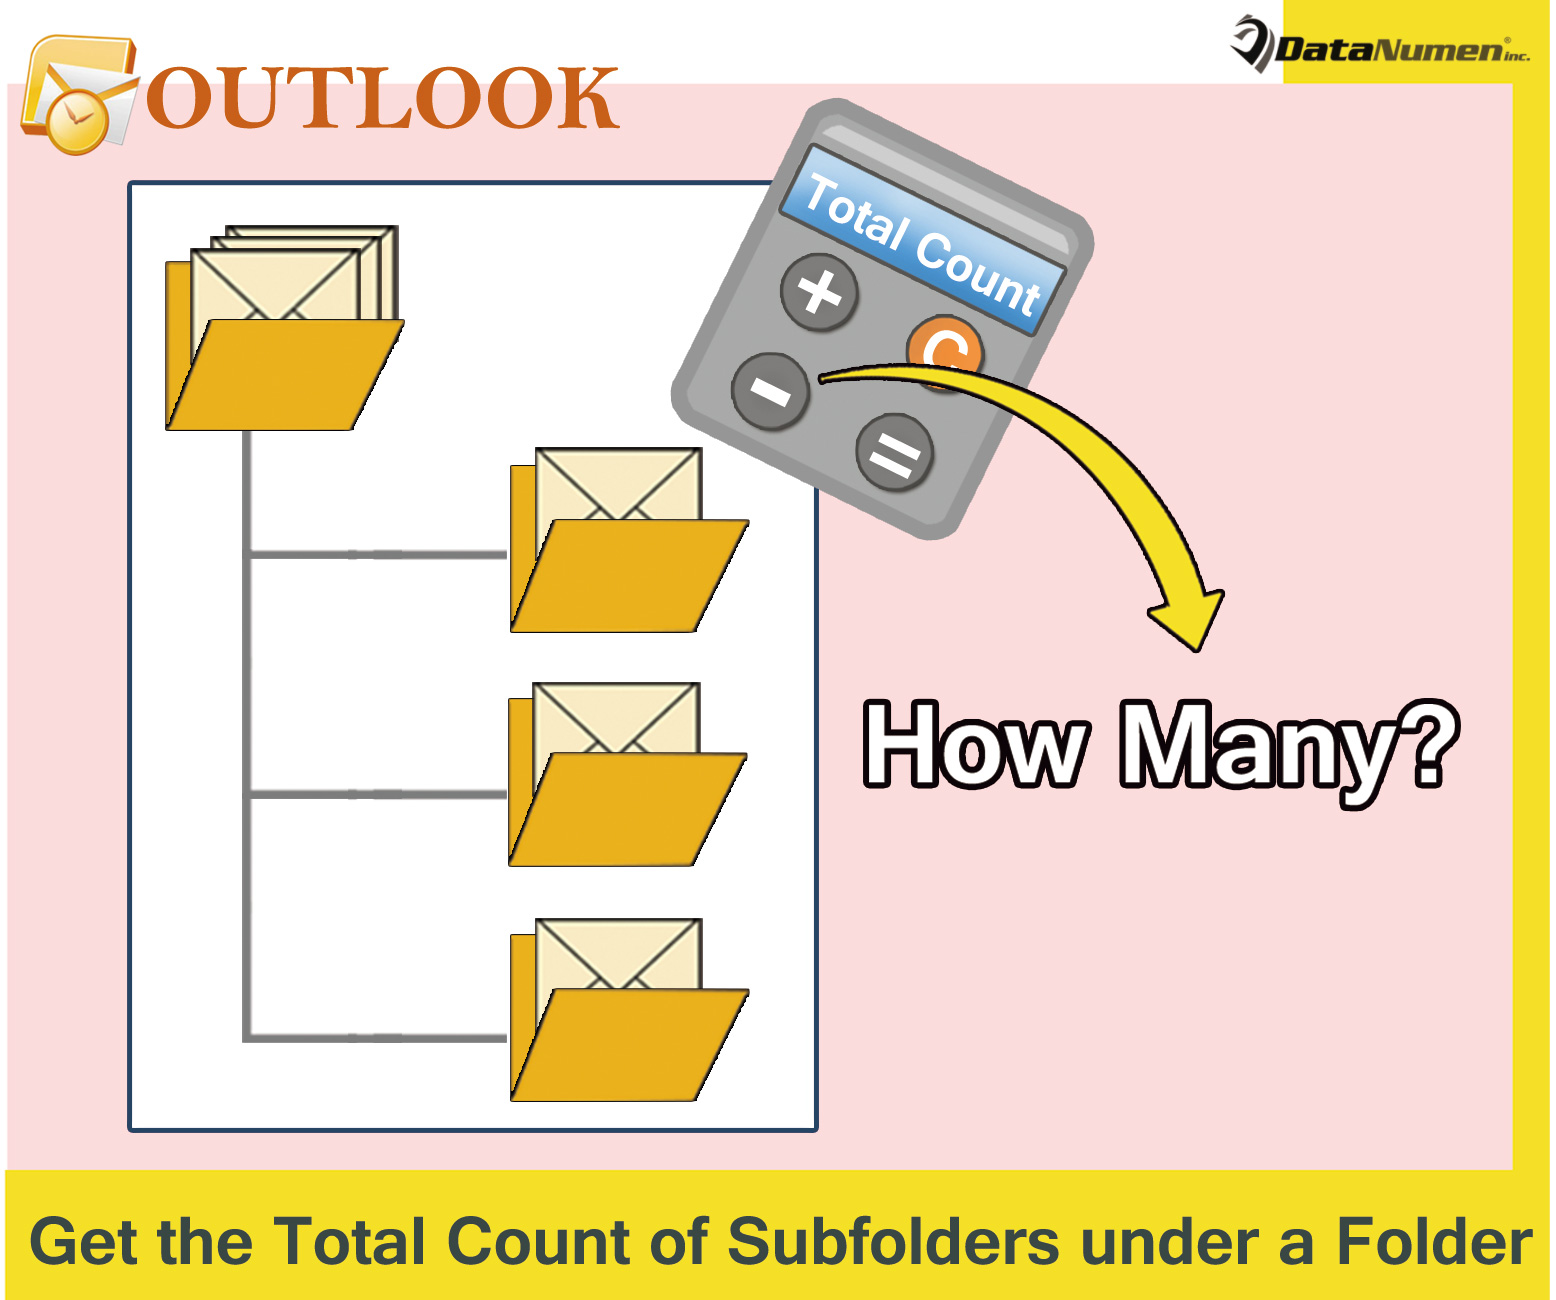 Quickly Get the Total Count of Subfolders under a Specific Folder in Outlook